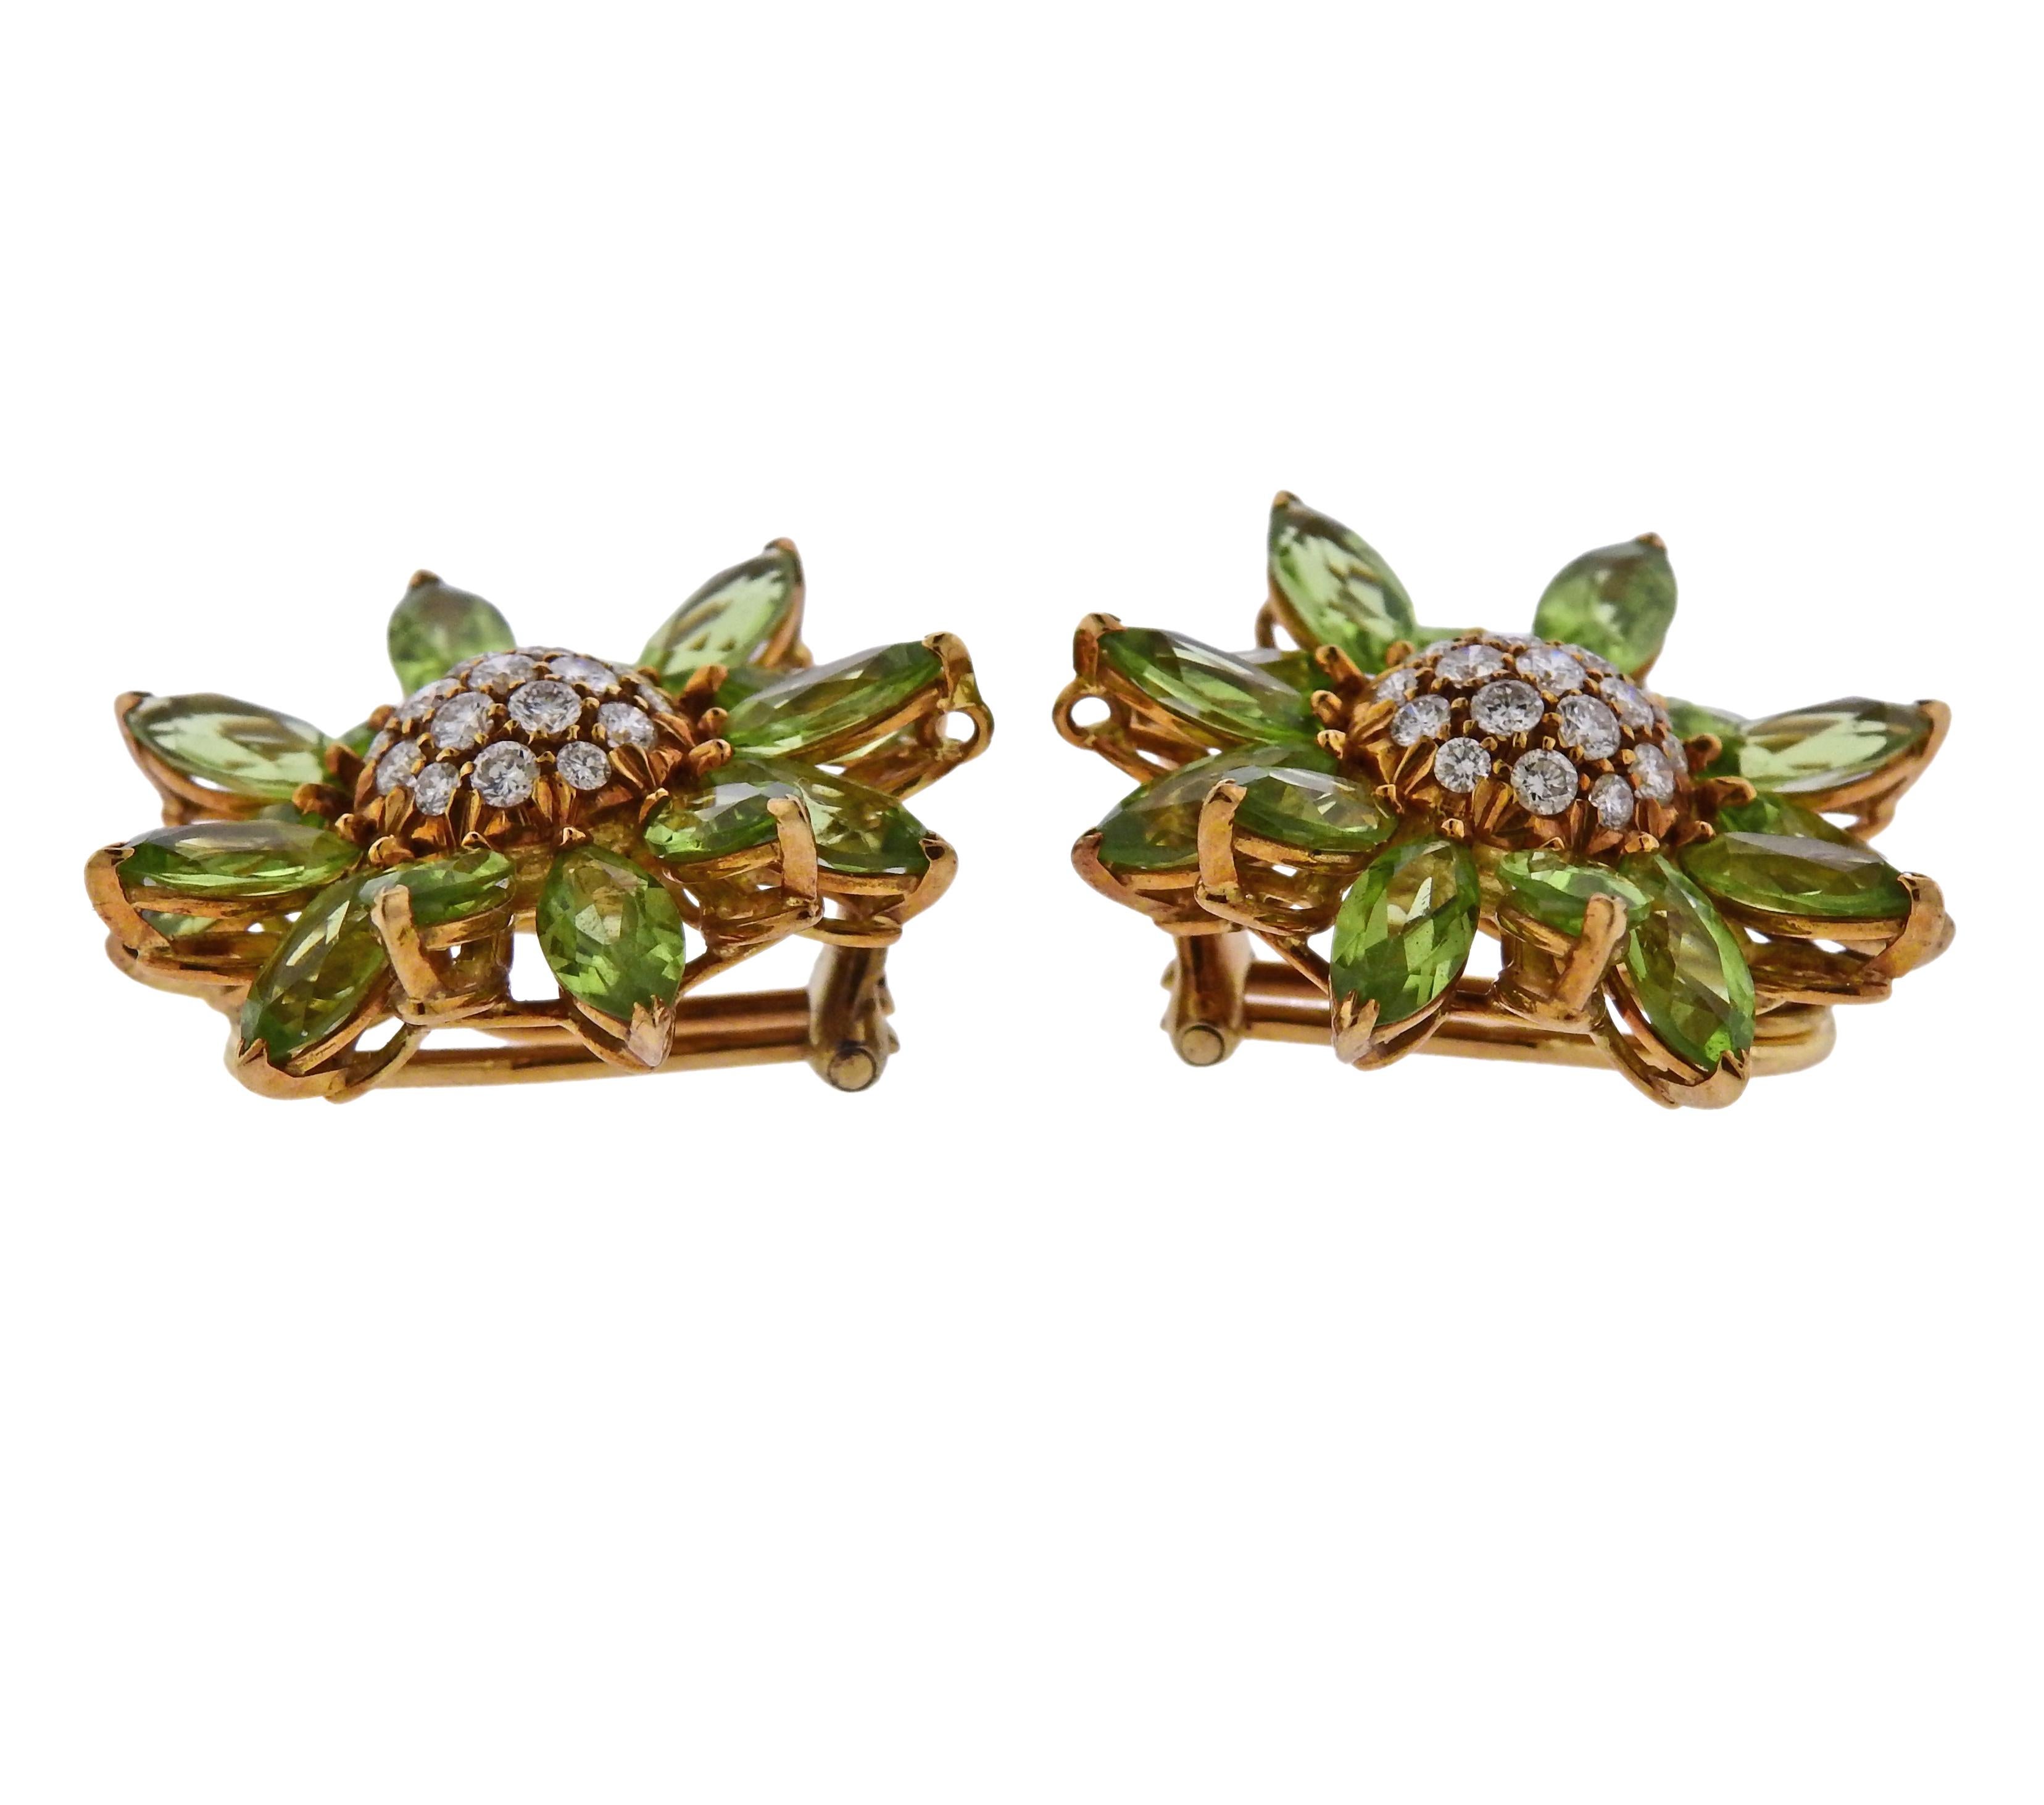 Pair of 18k yellow gold Heritage Daisy earrings by Asprey, set with approx. 1.00ctw in G/VS diamonds in the center, and peridots. Earrings are 27mm in diameter and weigh 18.7 grams. Marked 18Kt, 750, Asprey. 